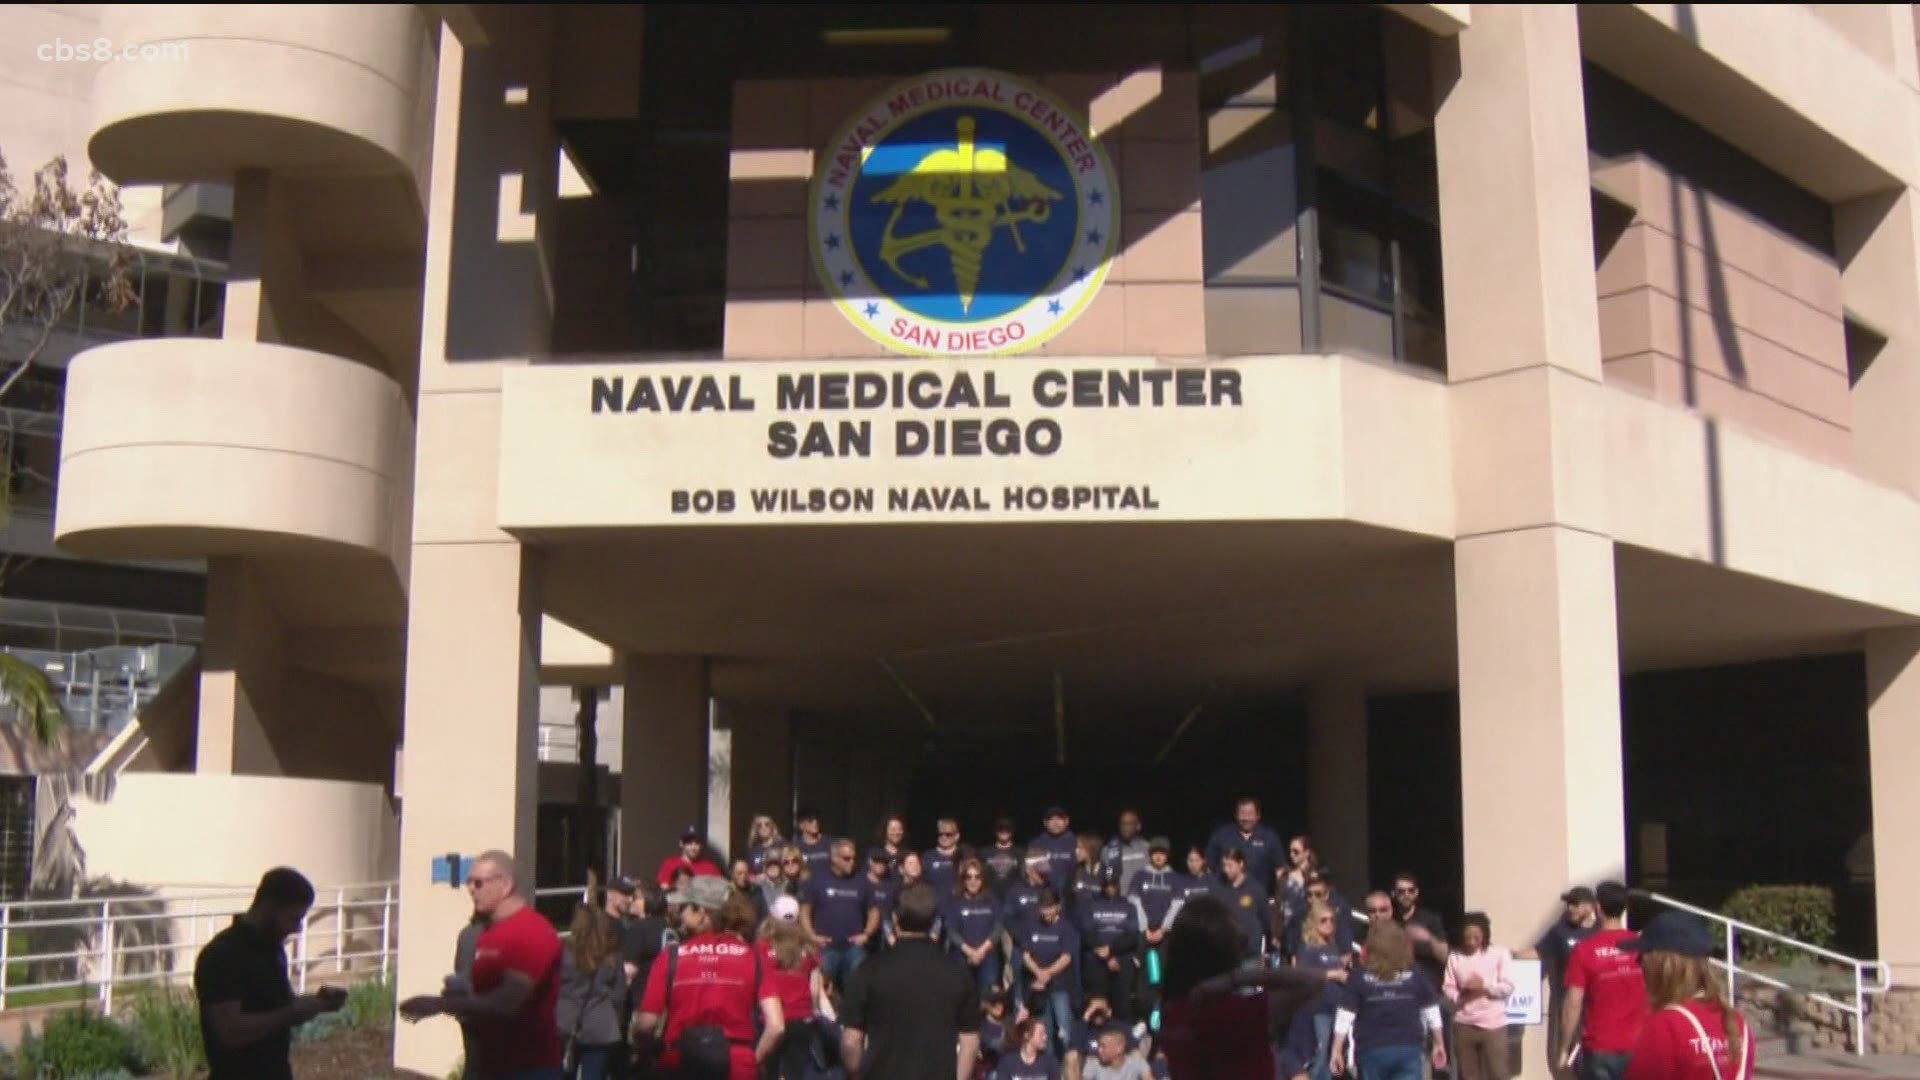 Navy leaders confirm Naval Medical Center San Diego has received its first batch of COVID-19 vaccines.